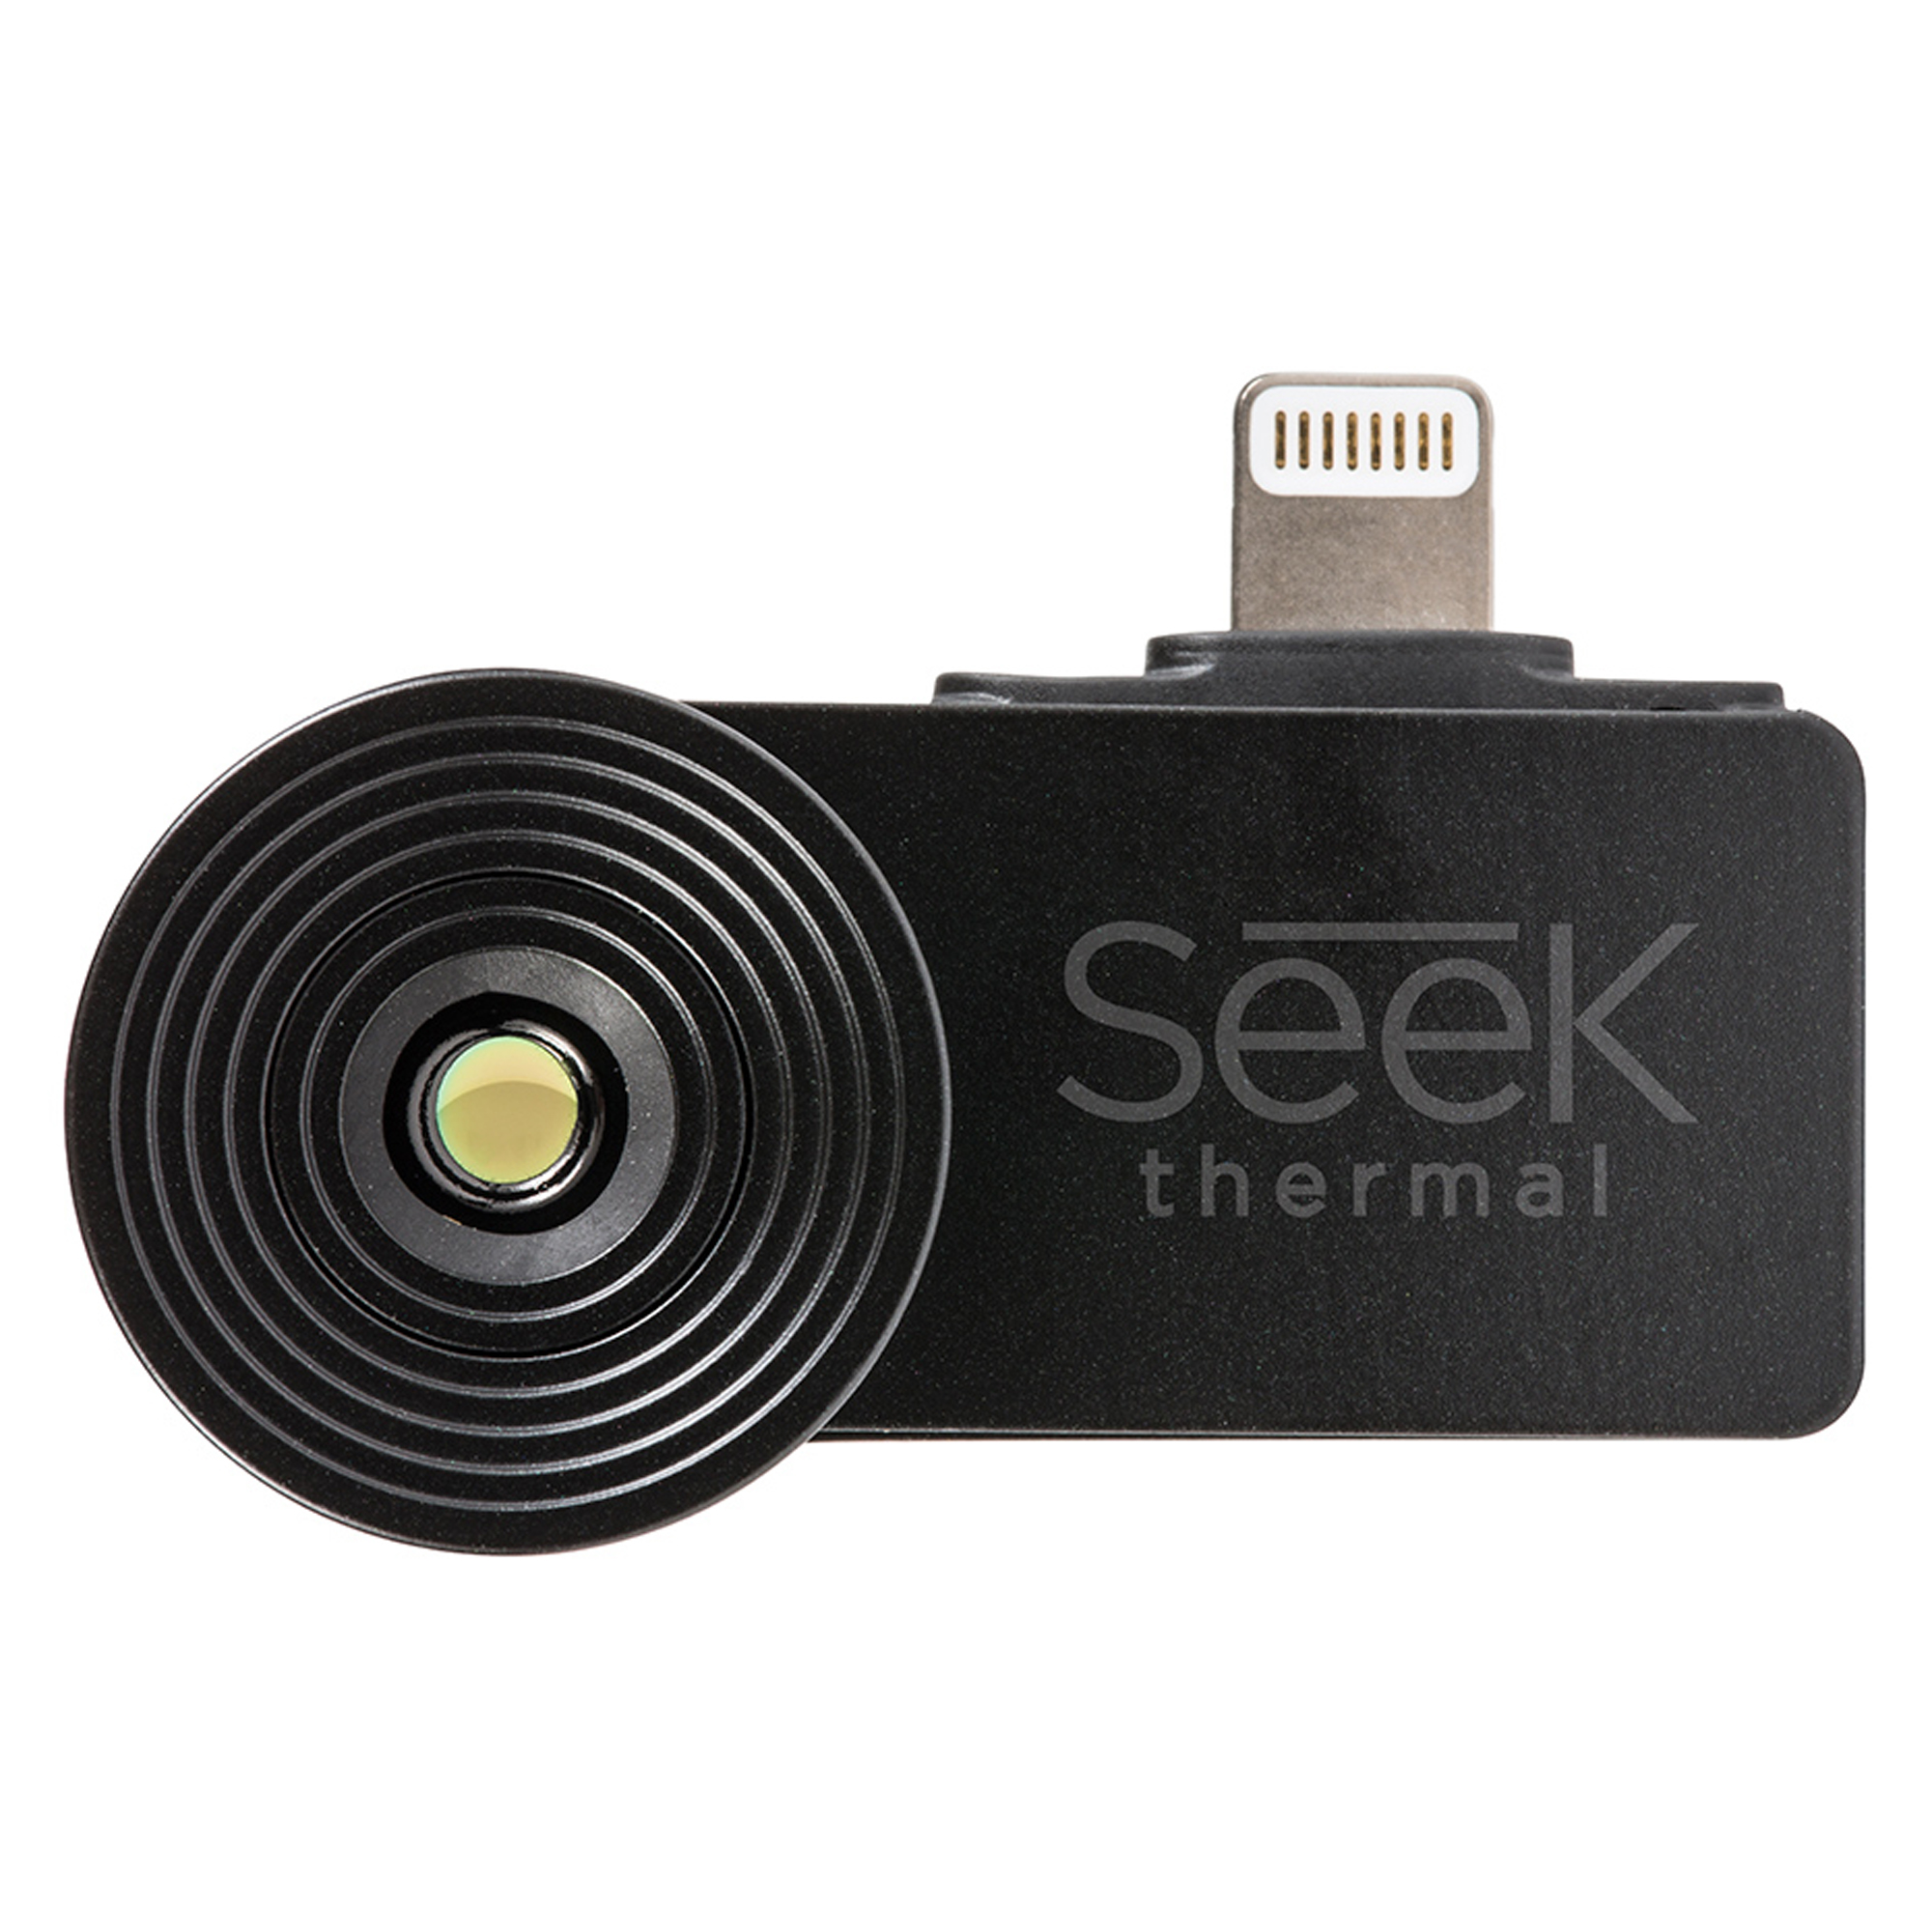 Seek Thermal Compact Image Viewer for iOS Compact Image Viewer - image 1 of 2